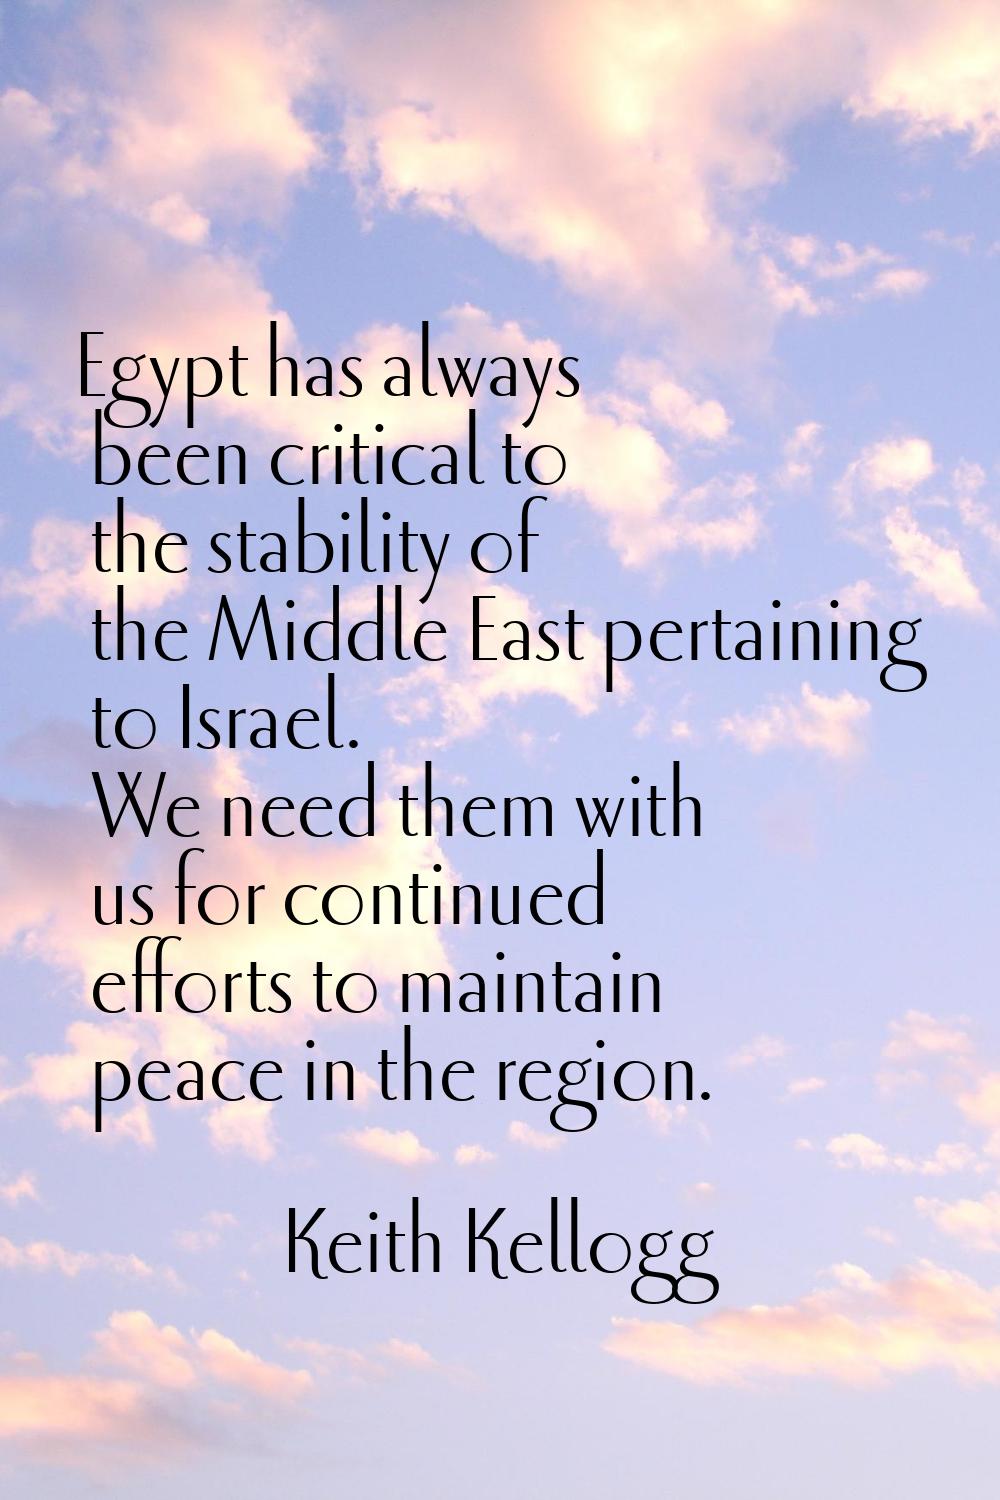 Egypt has always been critical to the stability of the Middle East pertaining to Israel. We need th